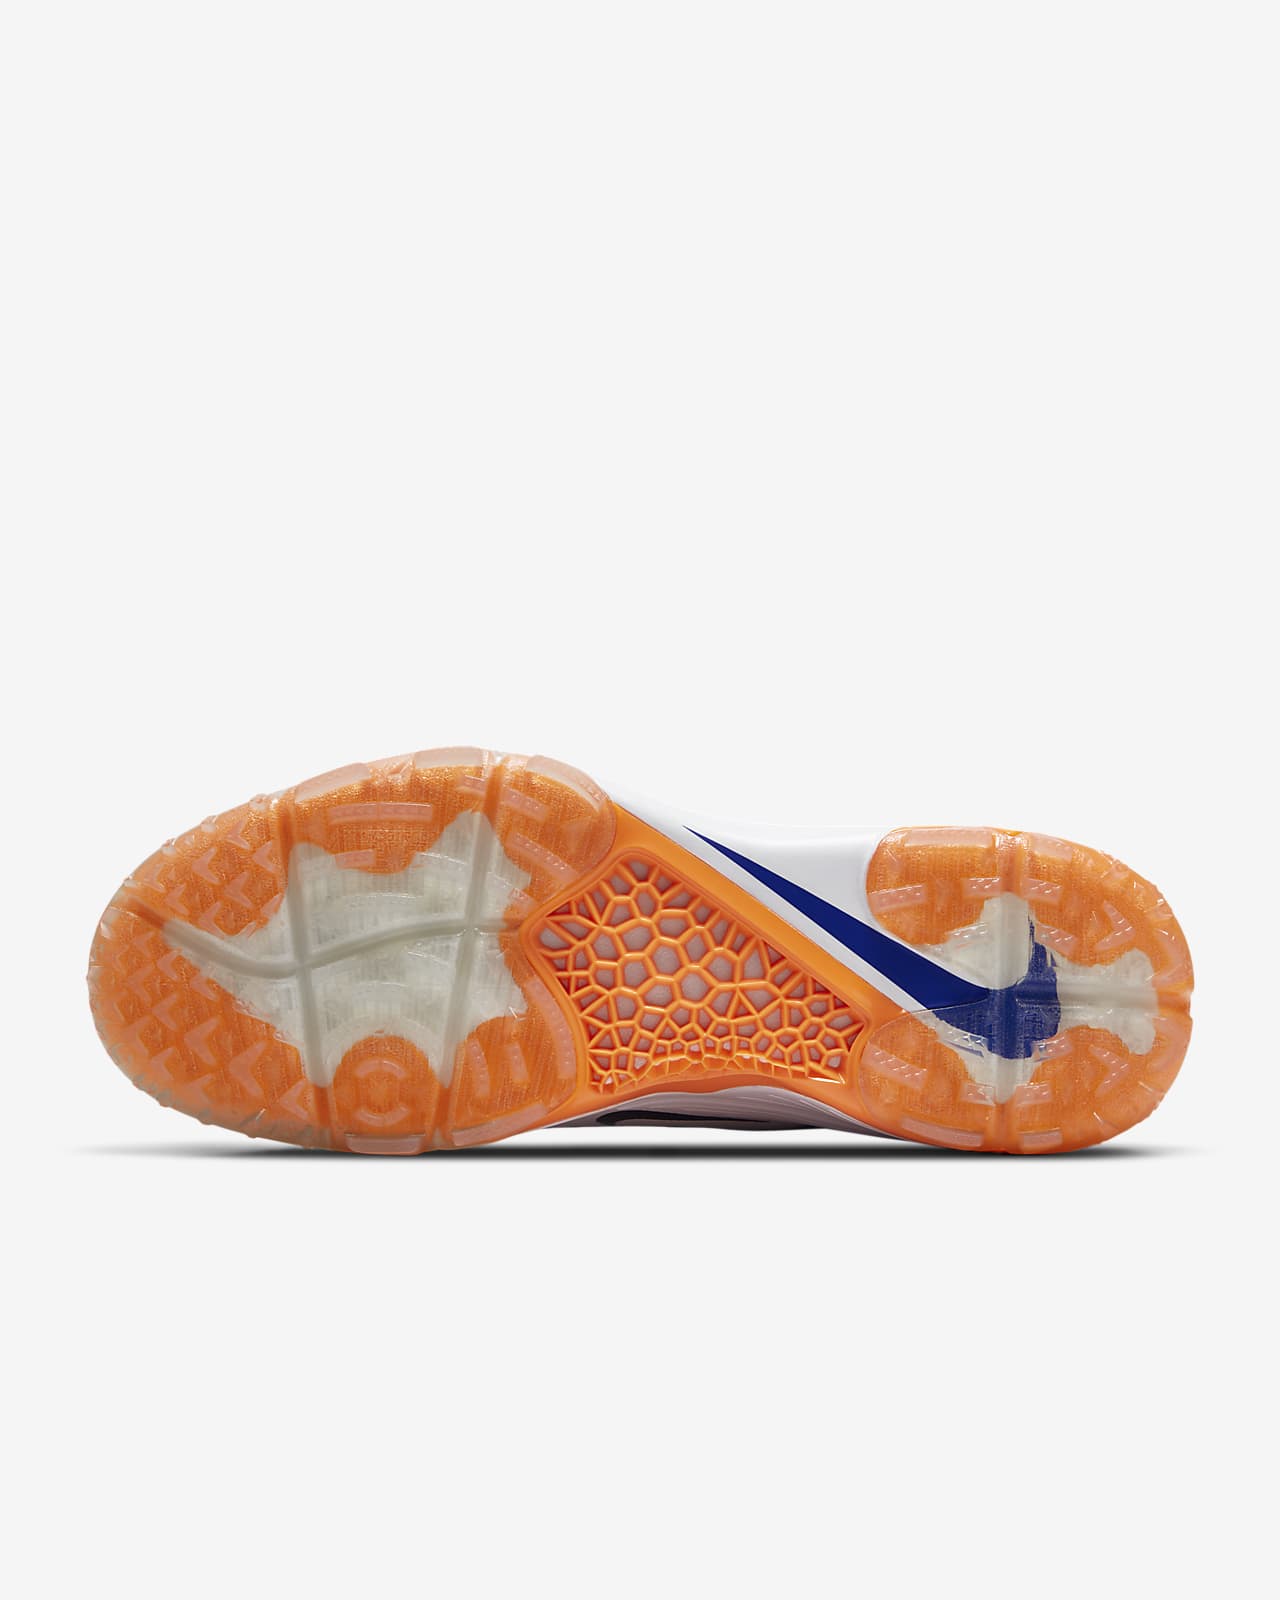 nike domain 2 cricket shoes online